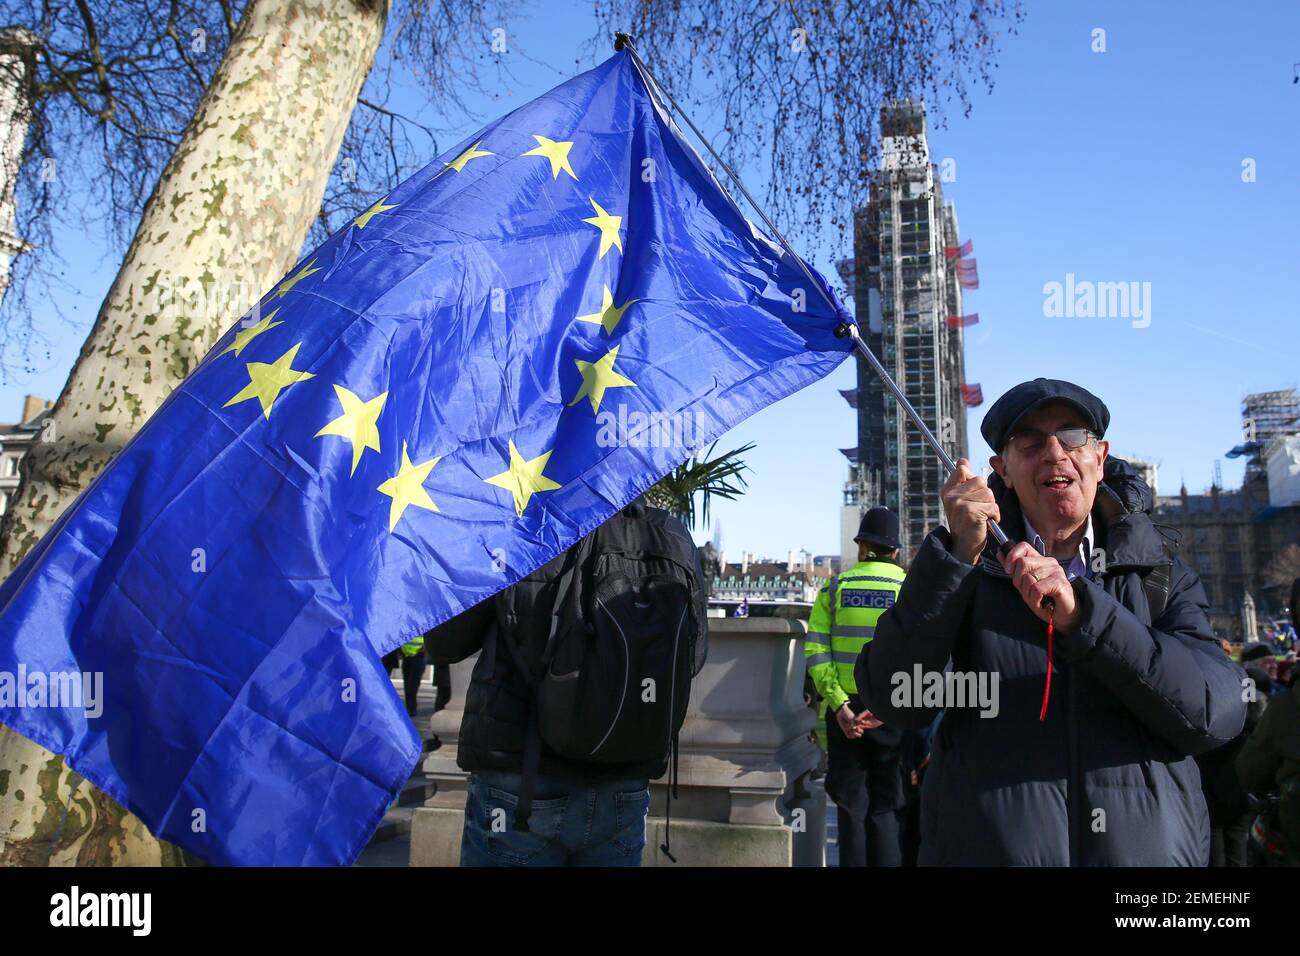 An anti-Brexit demonstrator is seen waving an European flag outside the  Houses of Parliament. MPs are set to debate and vote on the next steps in  the Brexit process later today as